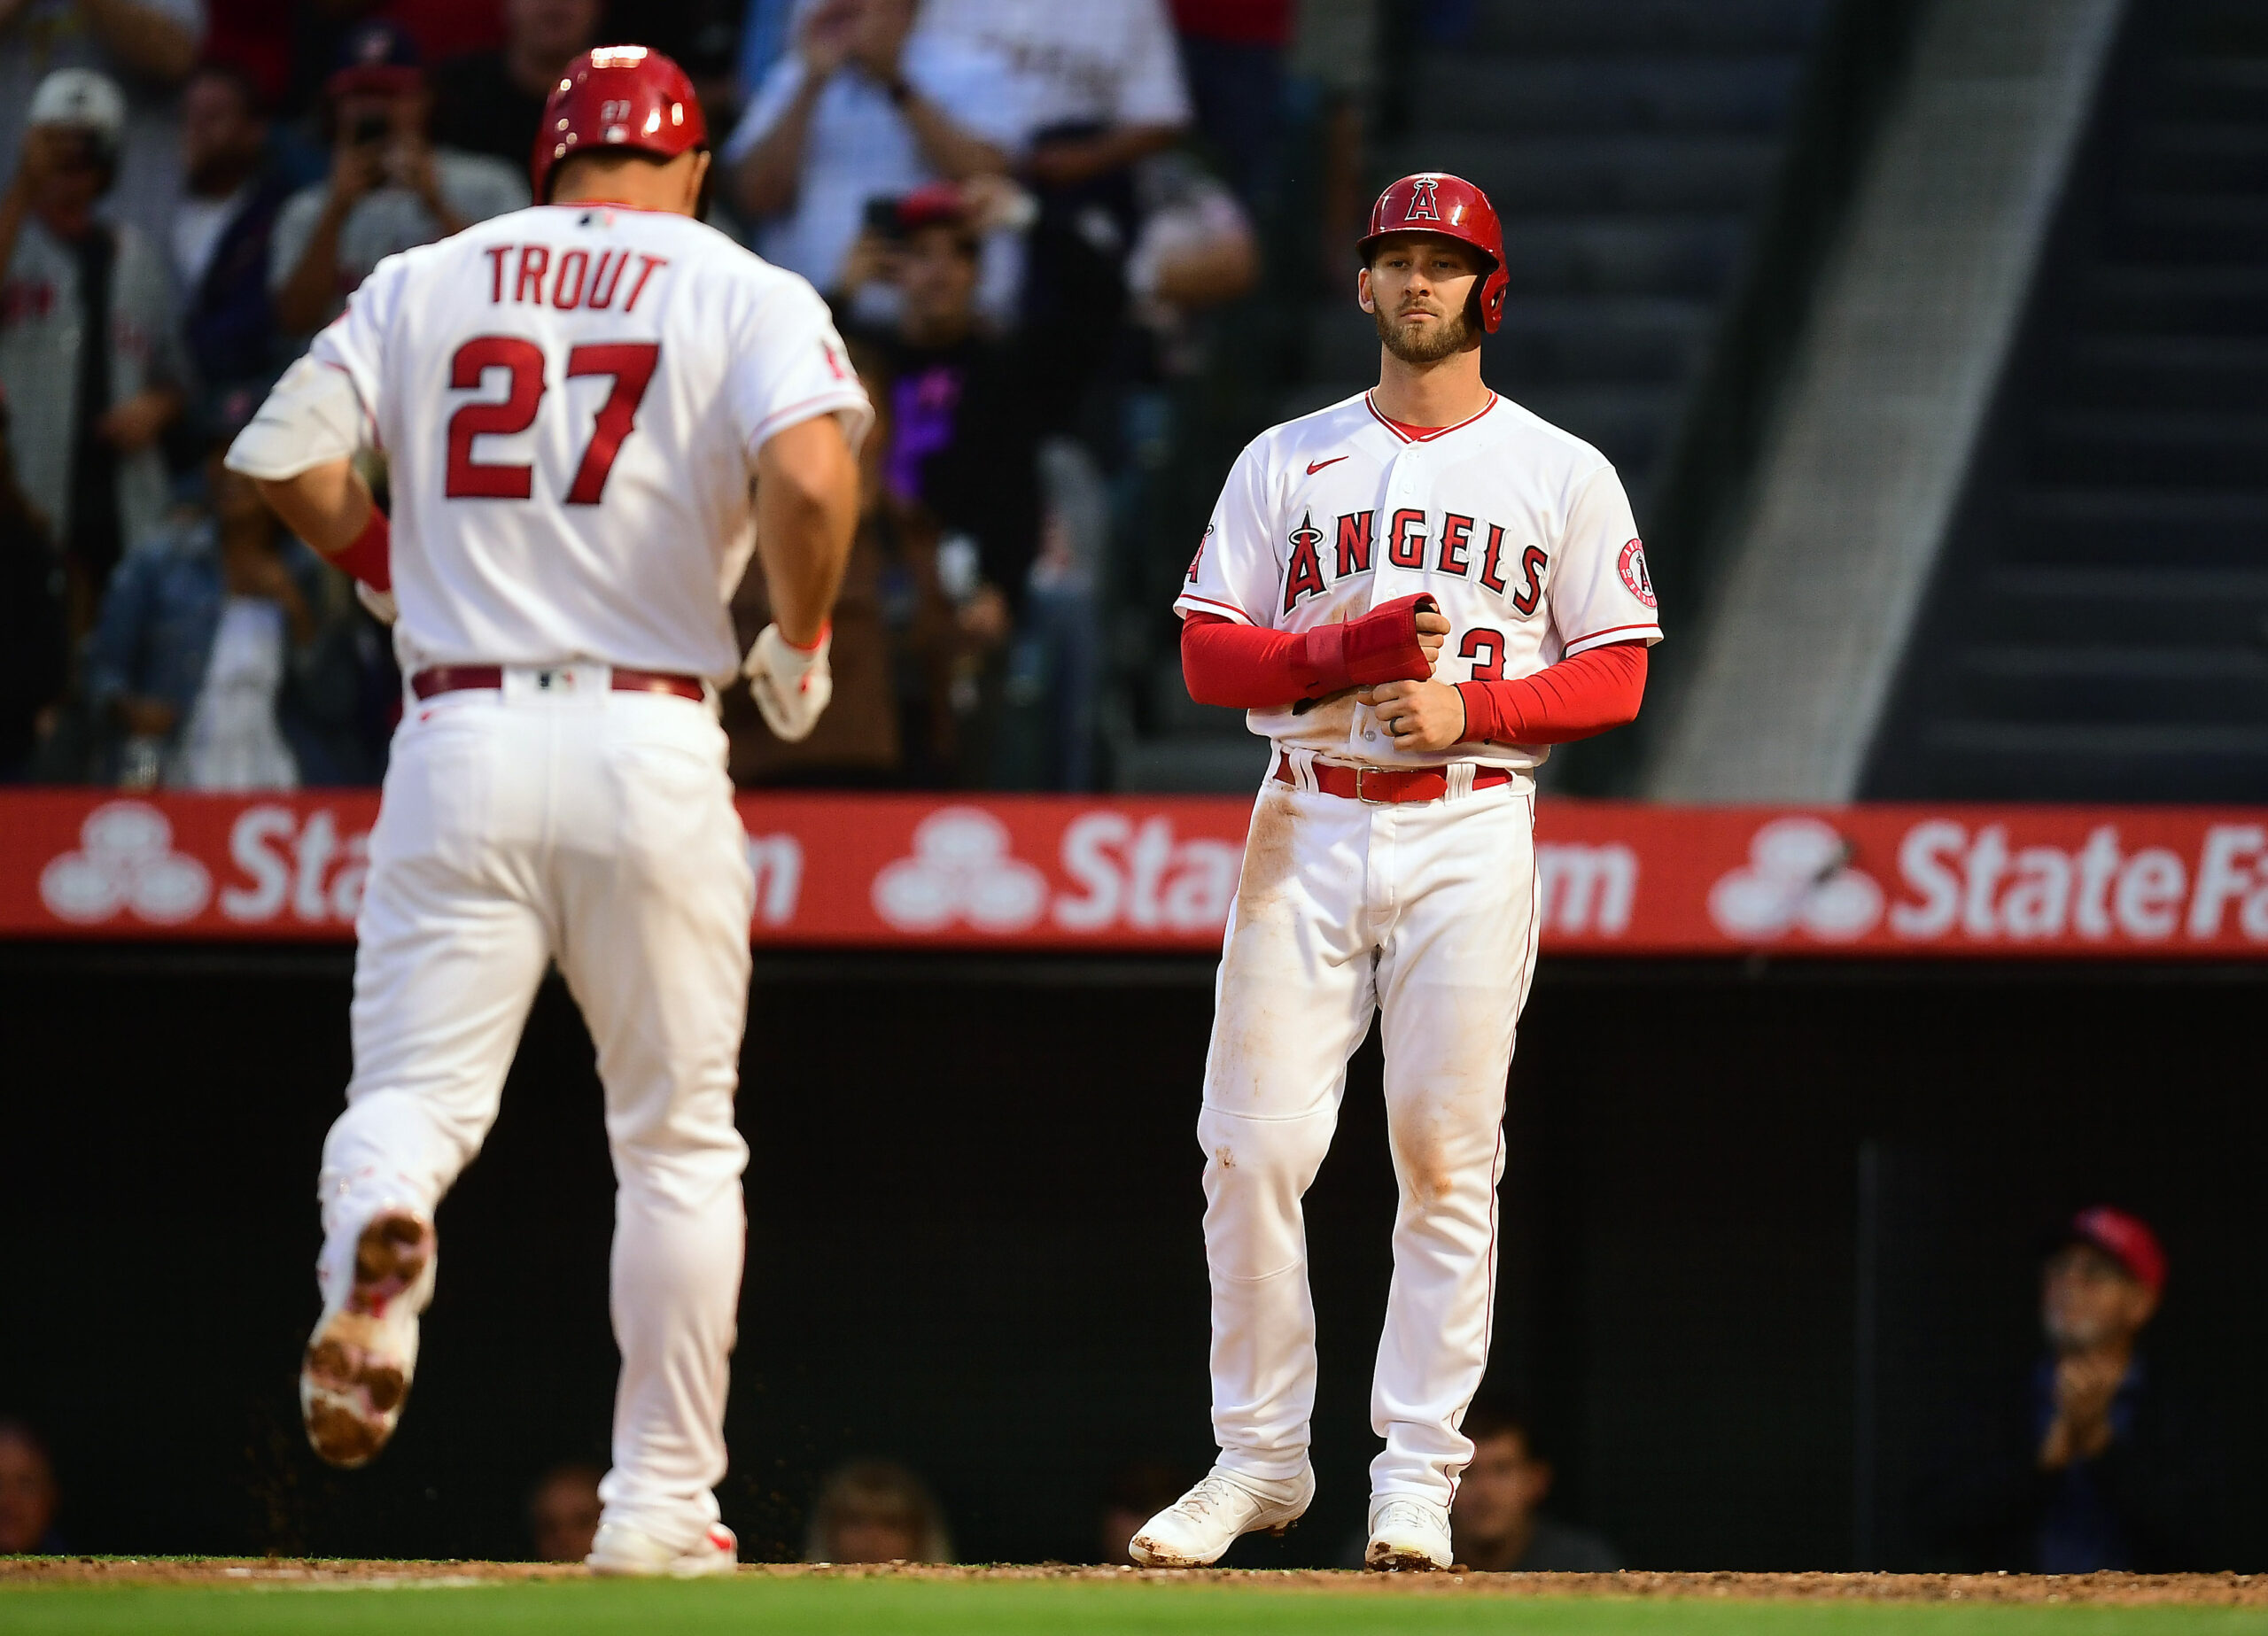 Angels Alone In 2022 With 3 Players Hitting Multi-Home Run Games